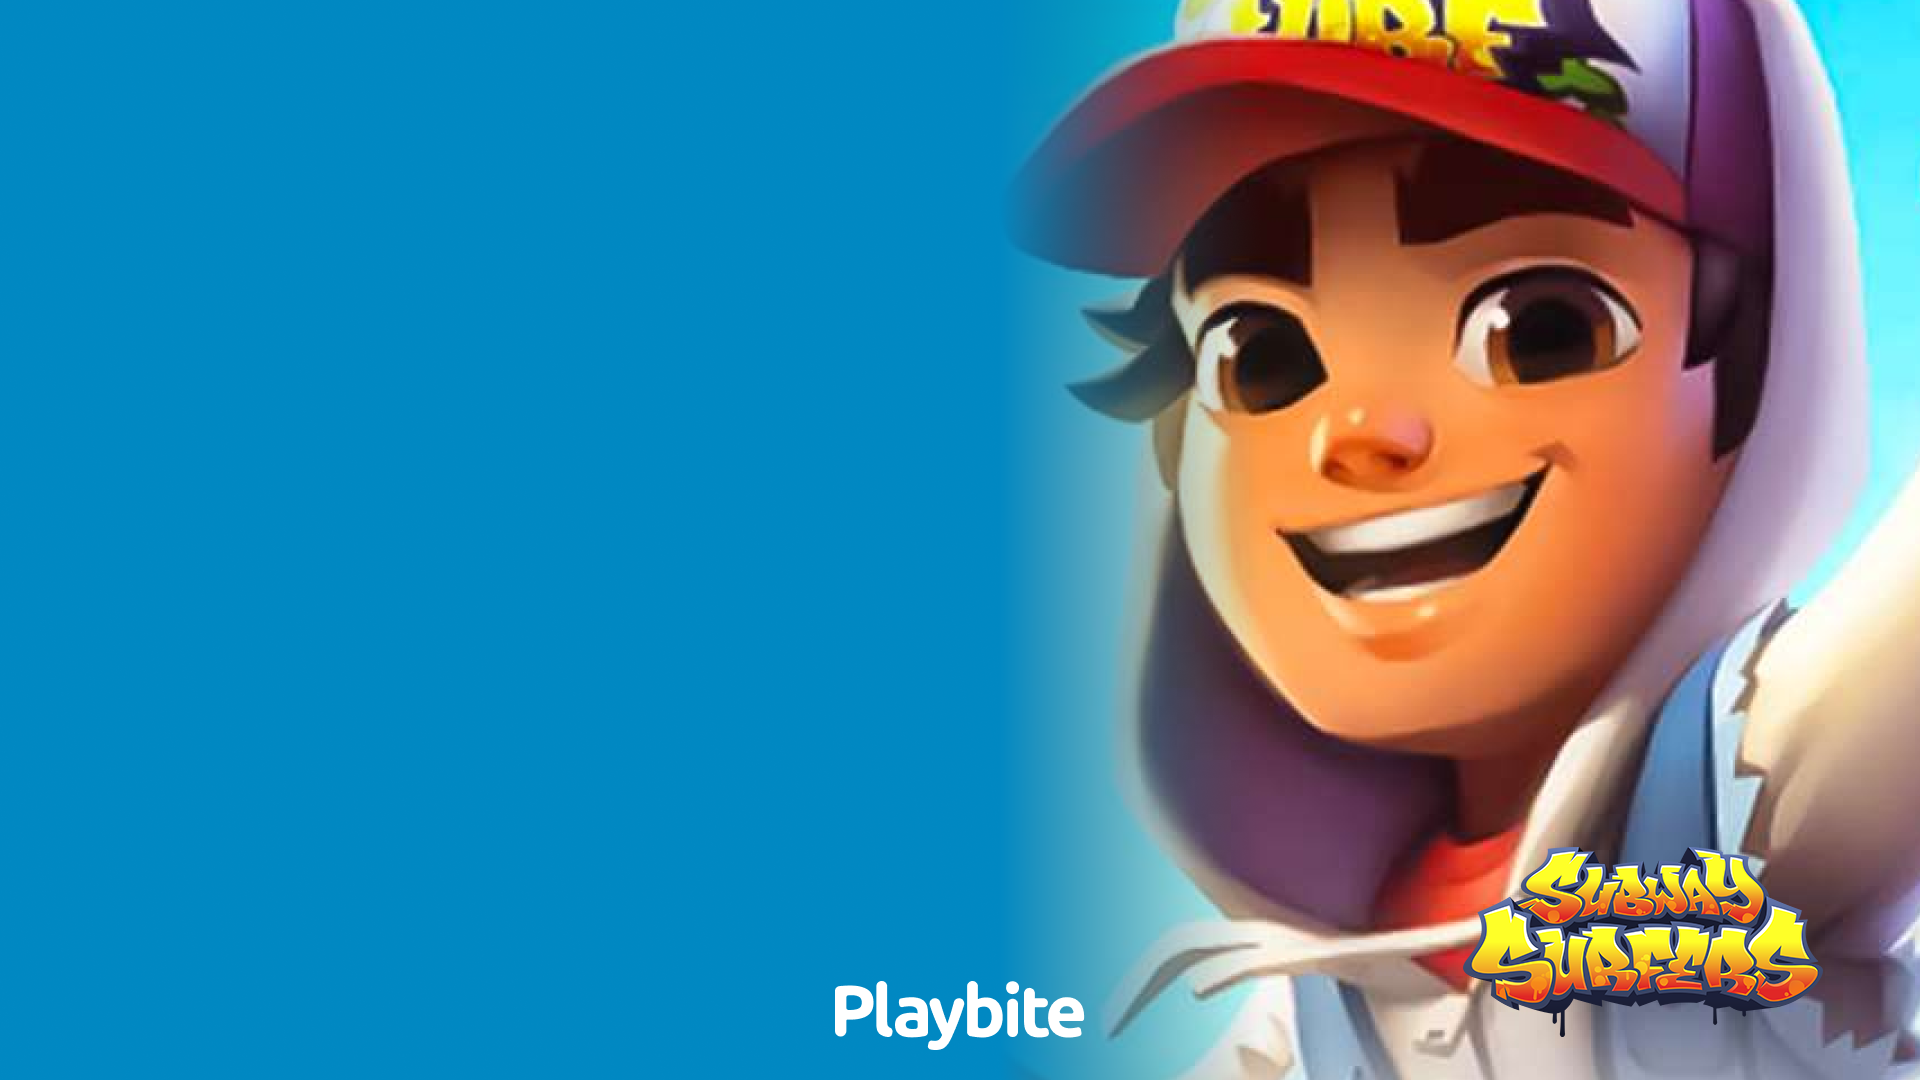 How to Play Subway Surfers on PC Windows 10